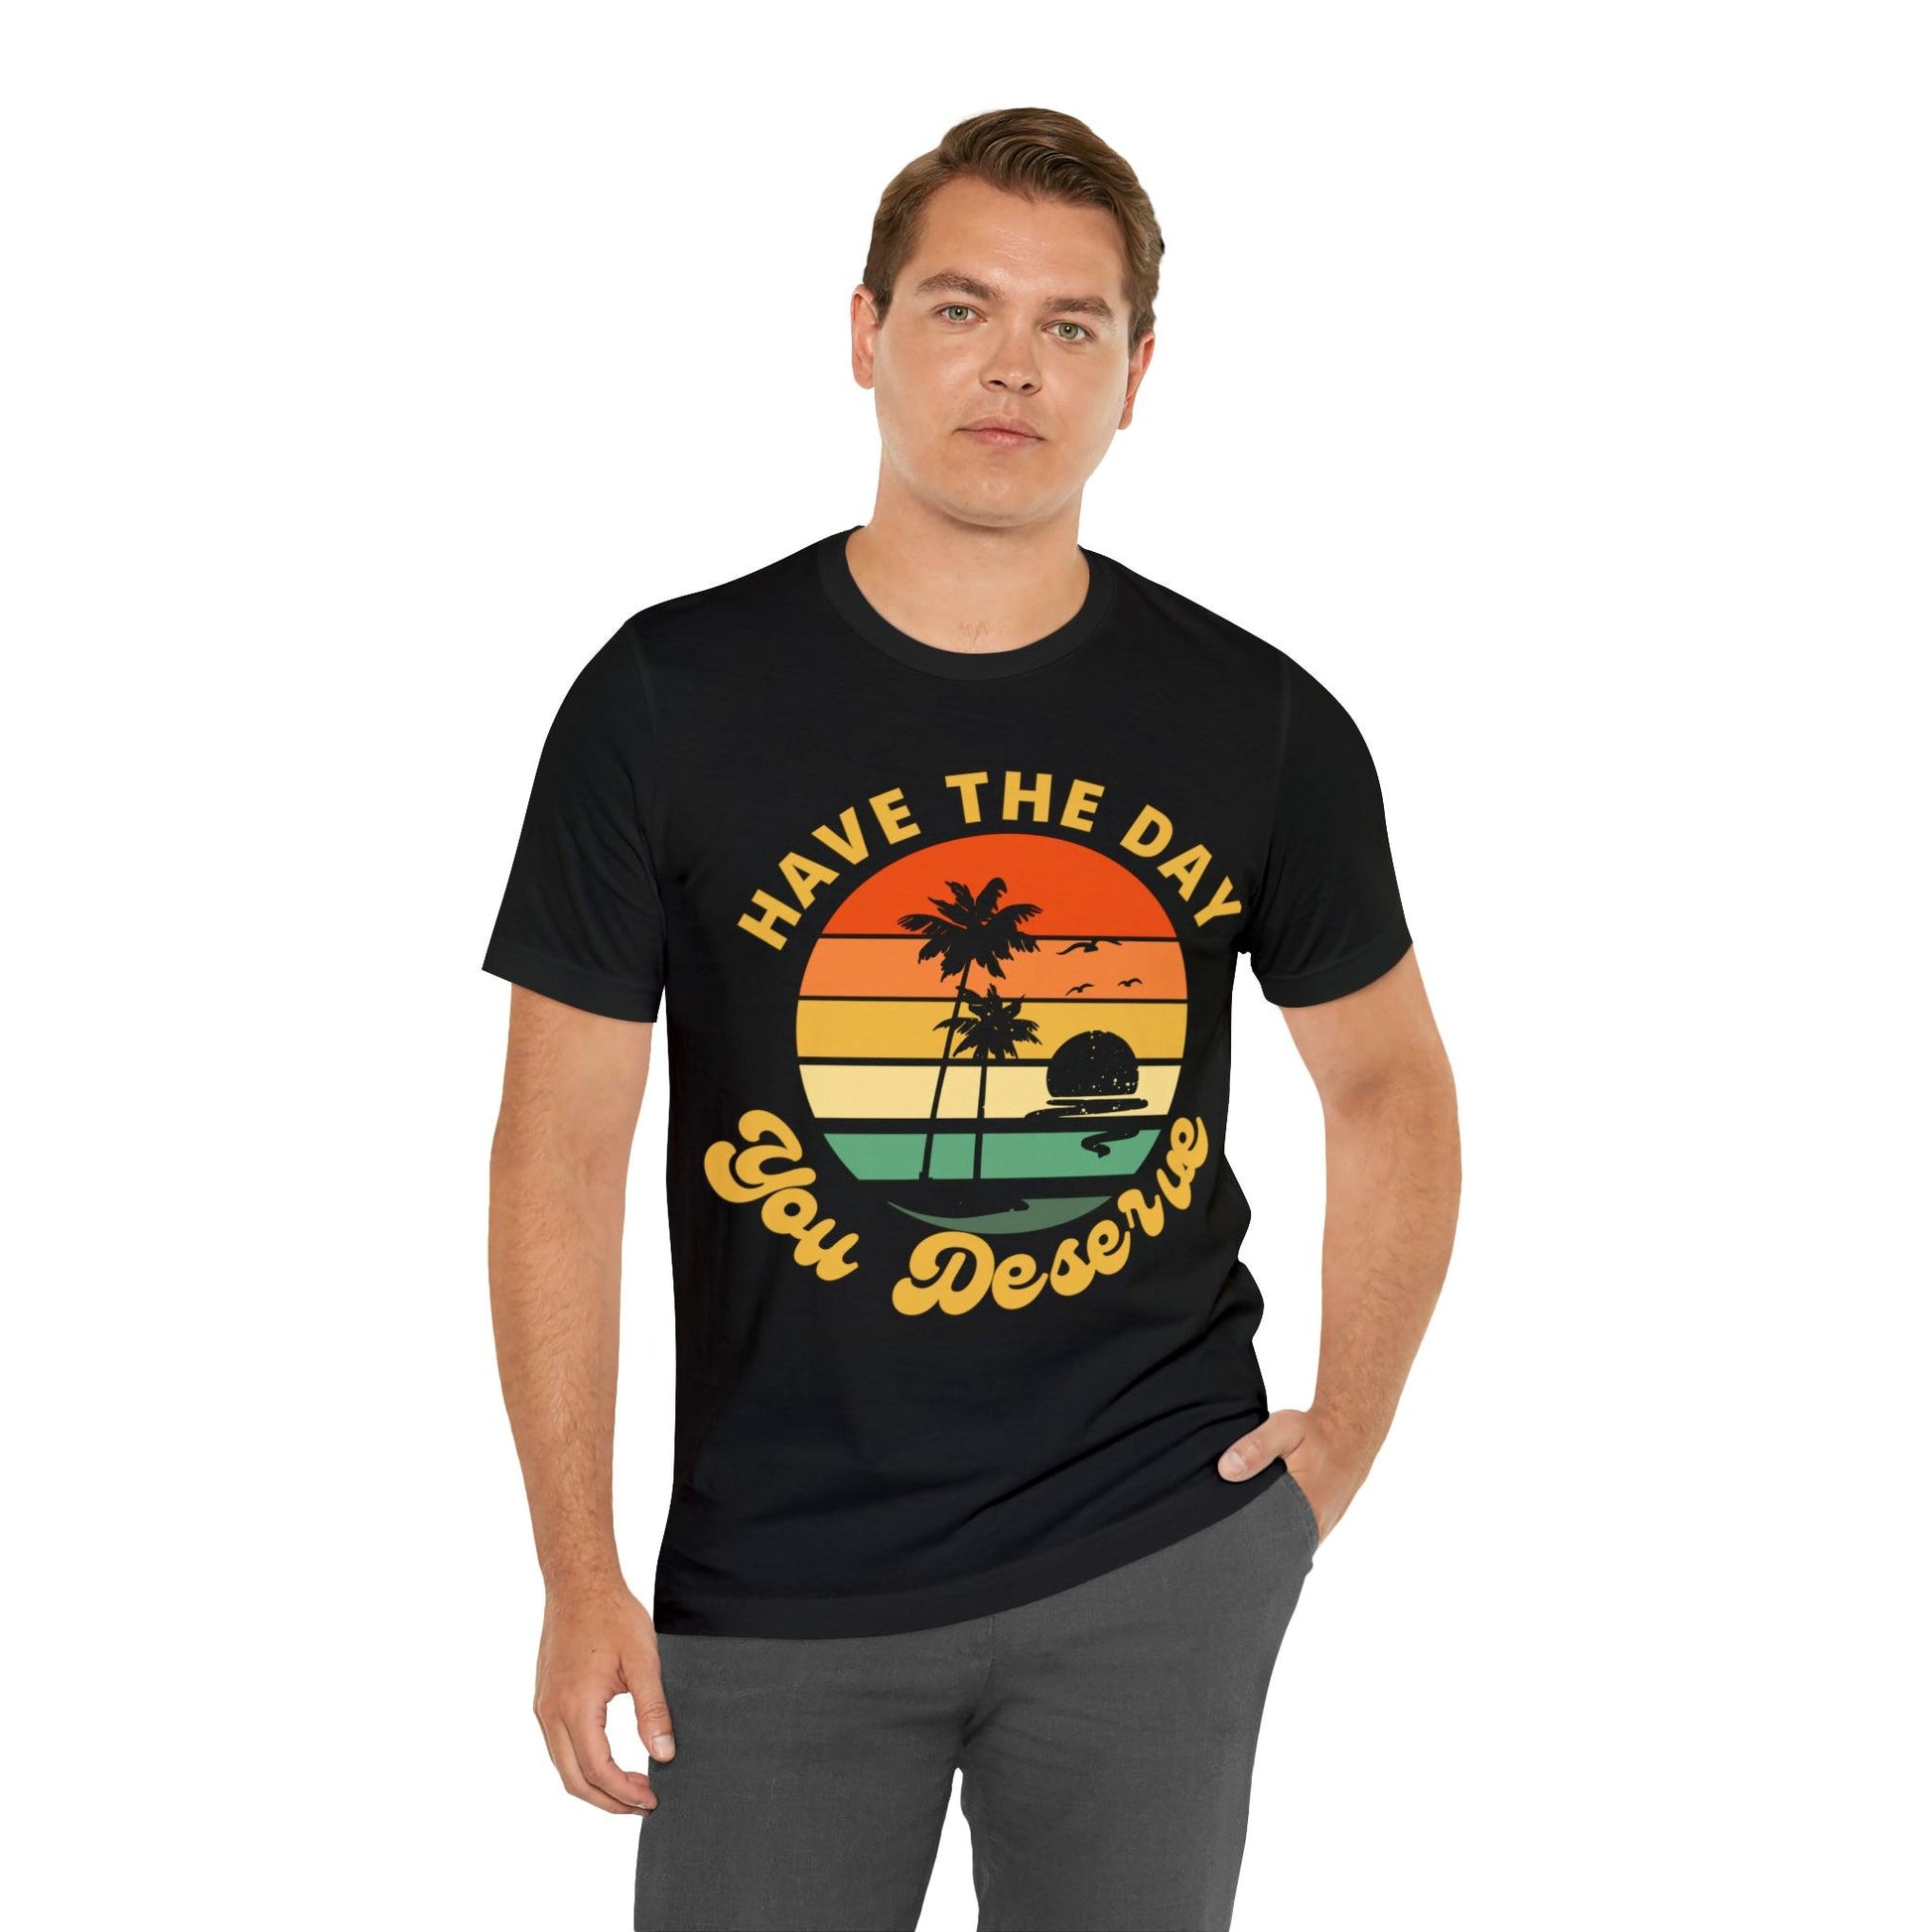 Inspirational Graphic Tee, Motivational Tee, Have the Day You Deserve Shirt, Positive Vibes Shirt, Trendy shirt and Eye Catching shirt Beach - Giftsmojo